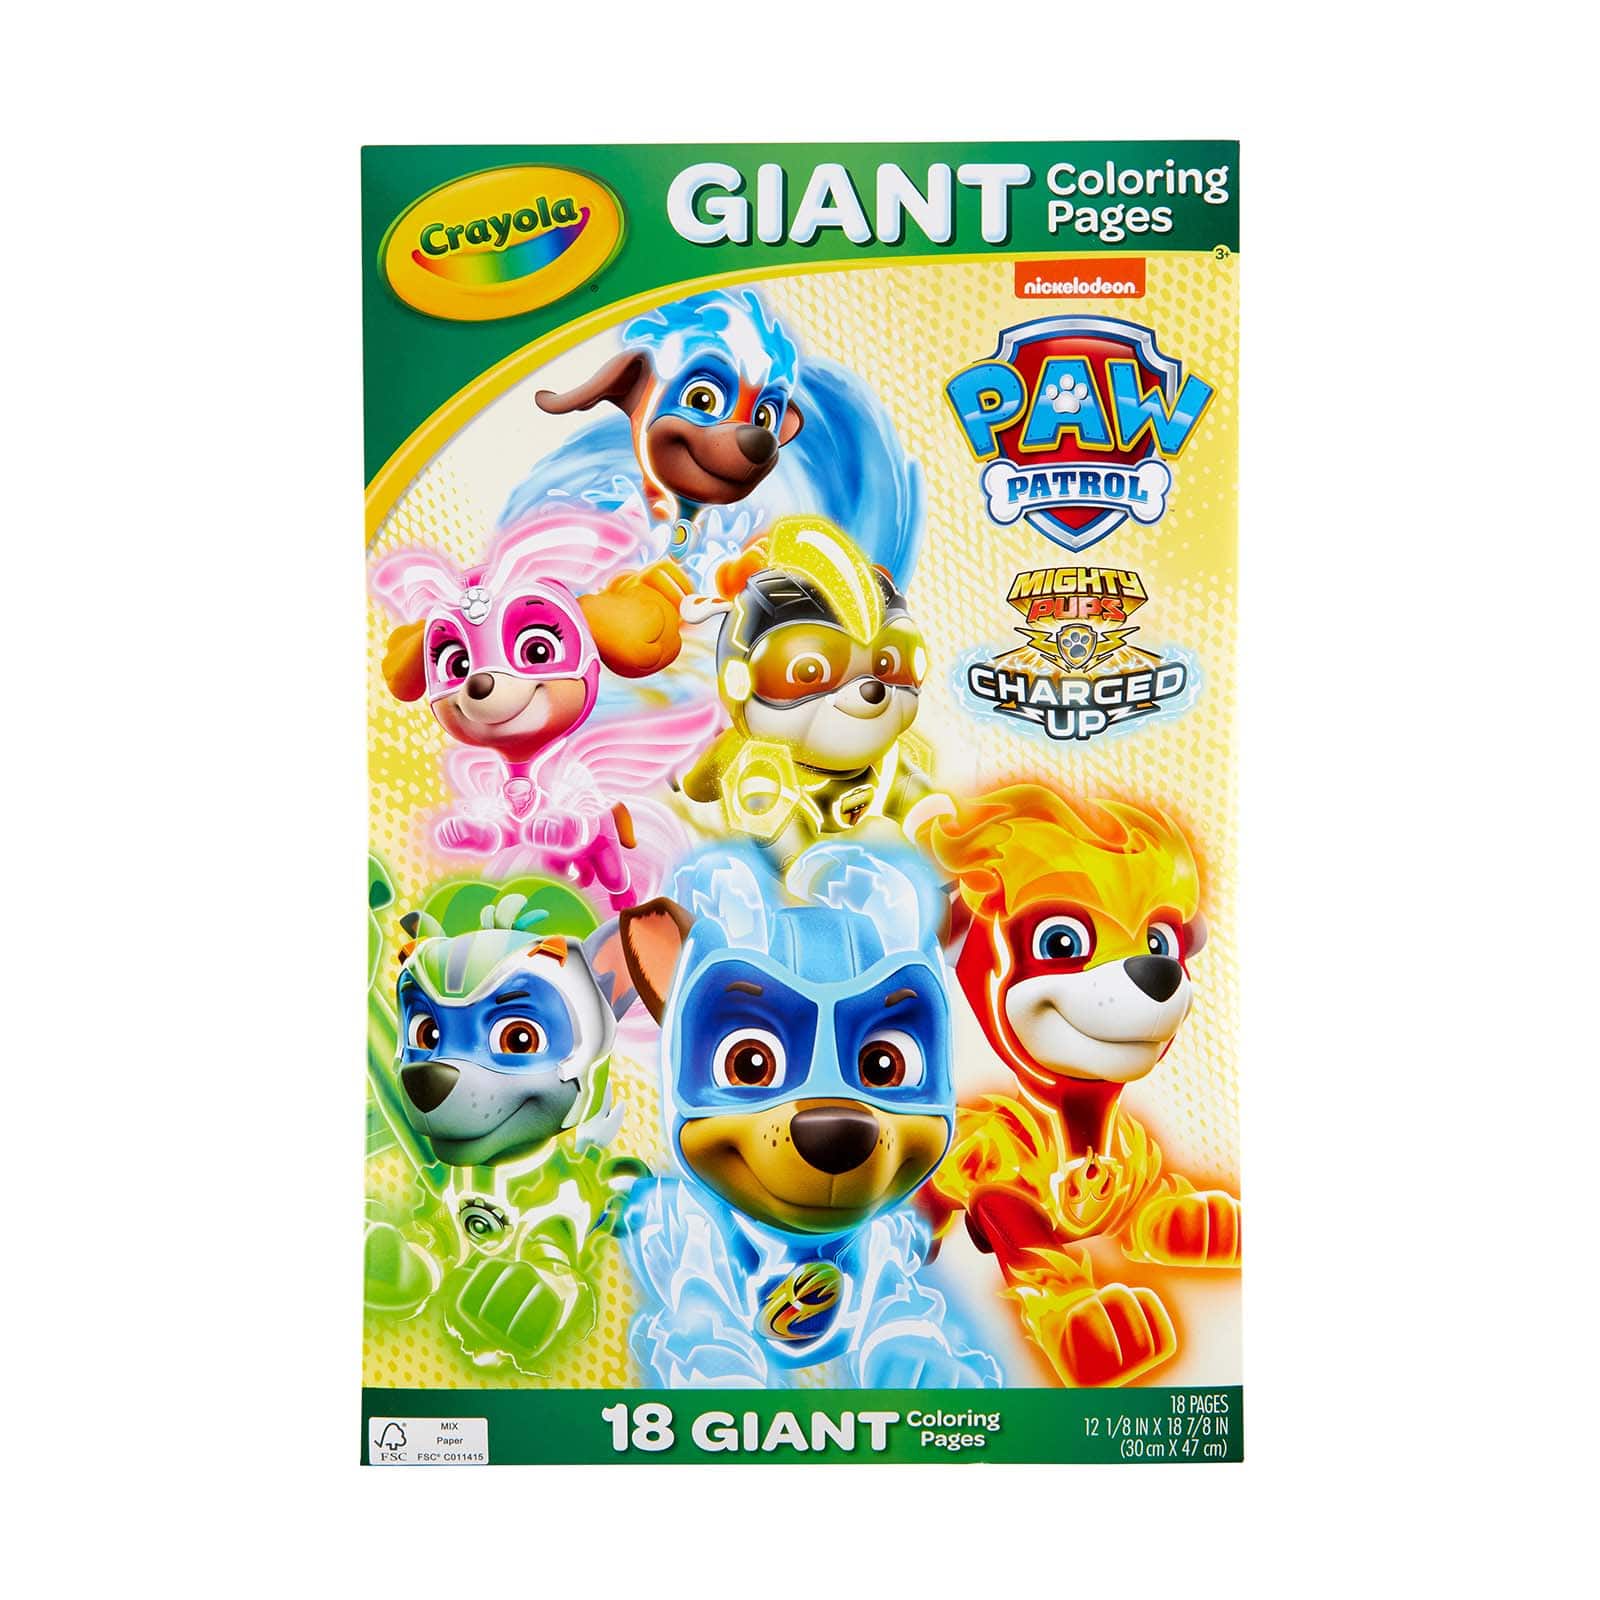 Shop for the Crayola® Paw Patrol® Giant Coloring Pages at Michaels